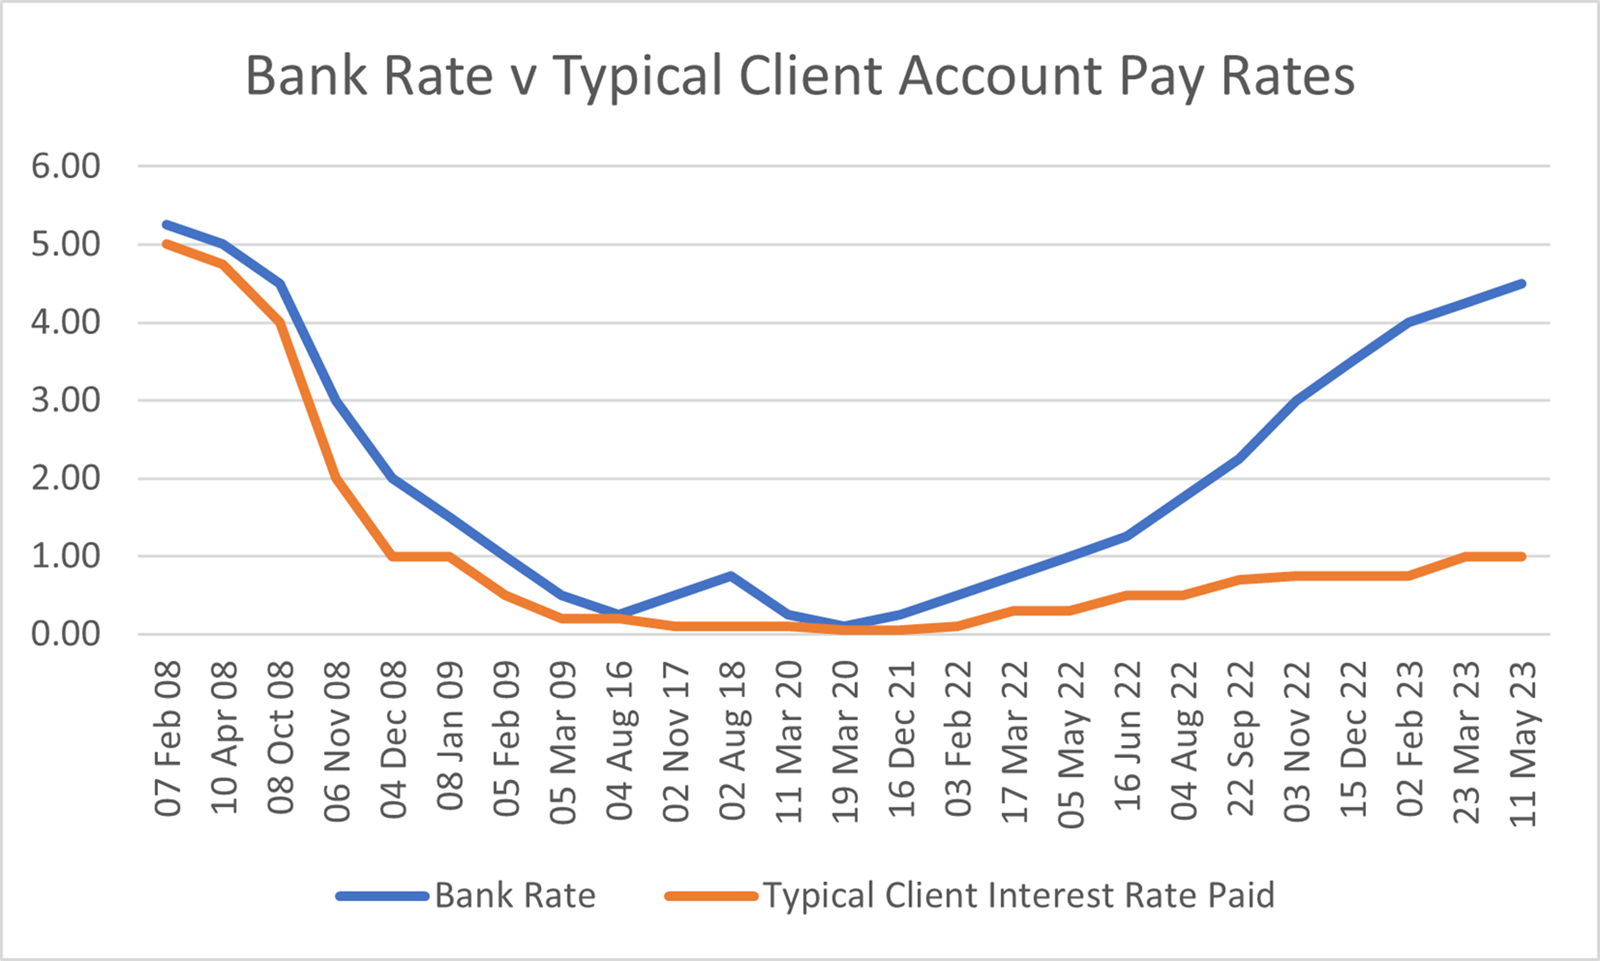 Chart showing Bank Rate v Typical Client Account Pay Rates